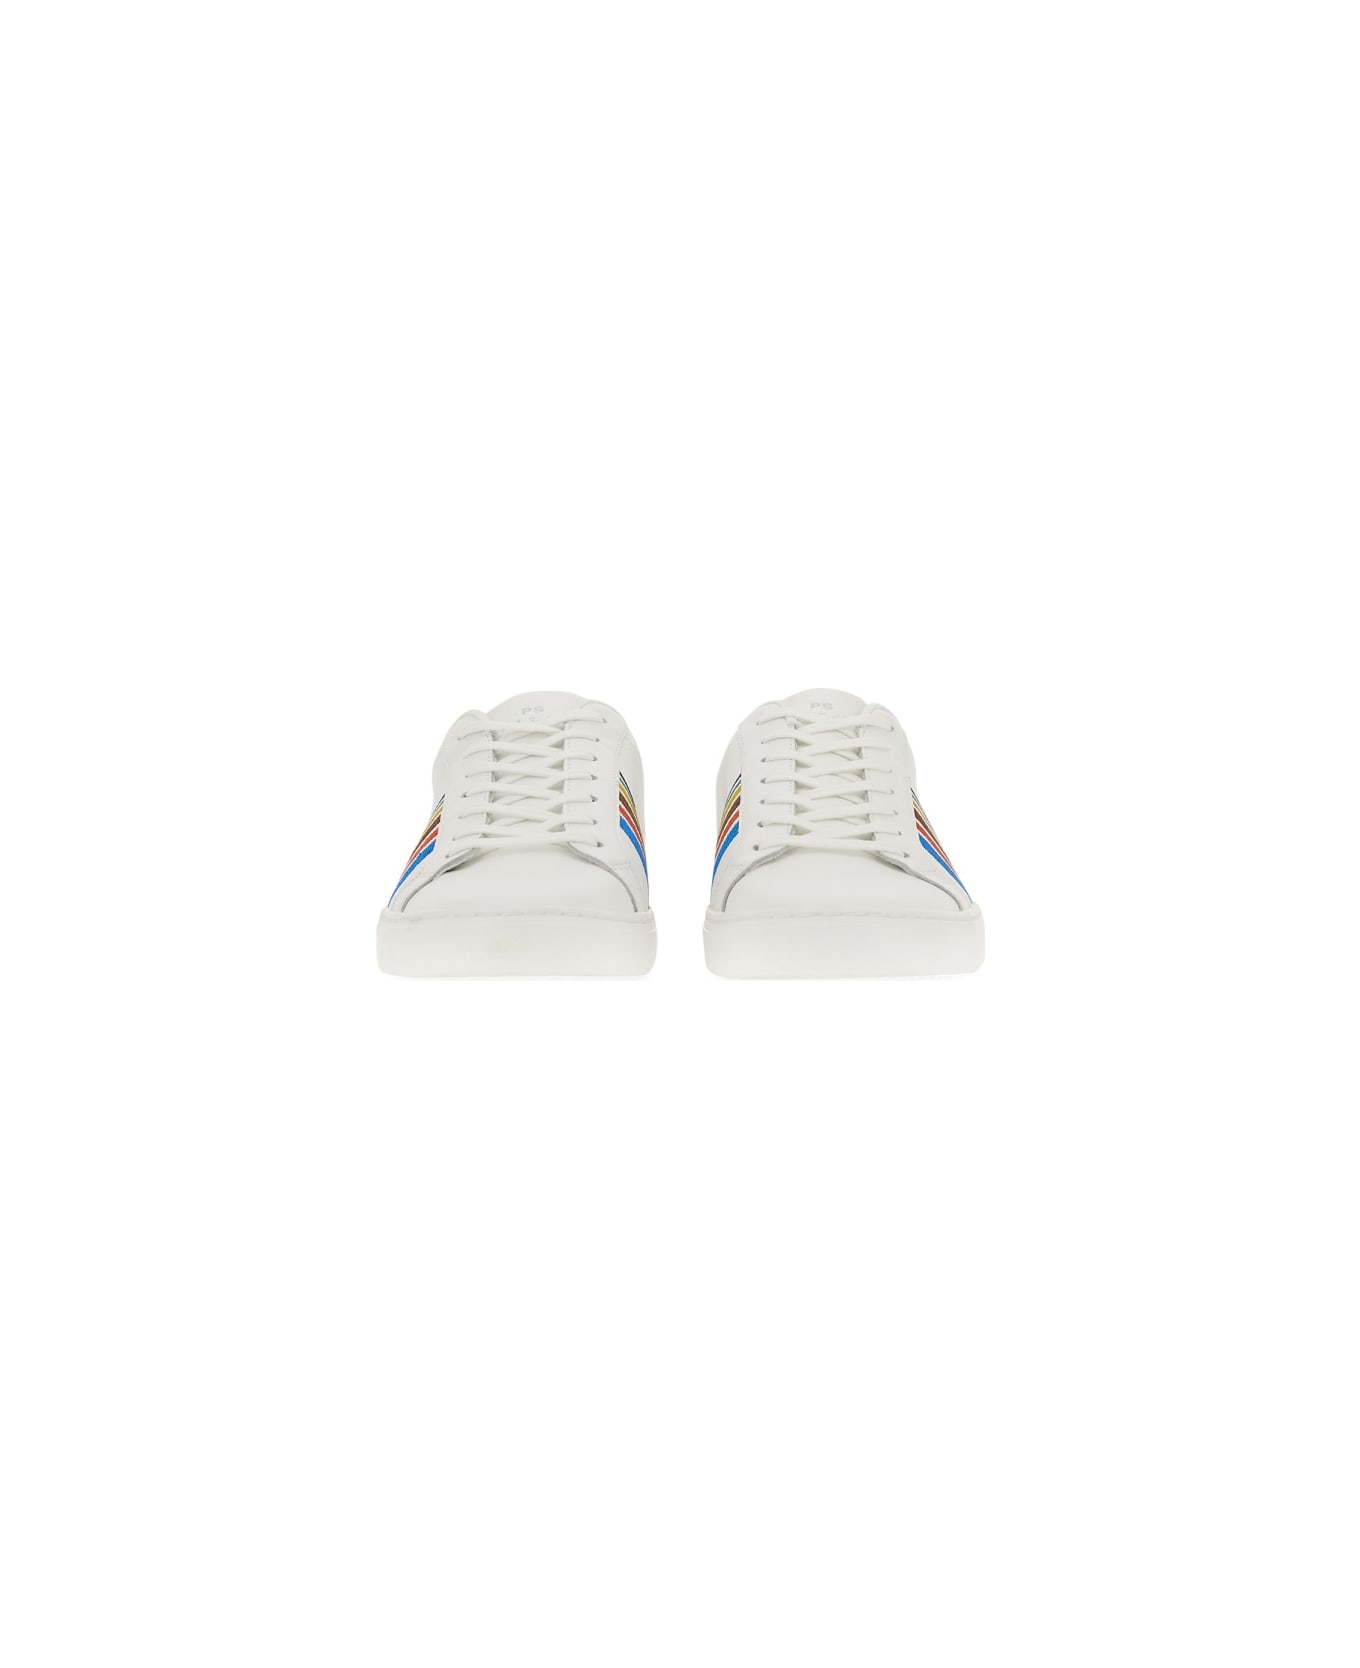 PS by Paul Smith Signature Stripe Sneaker - WHITE